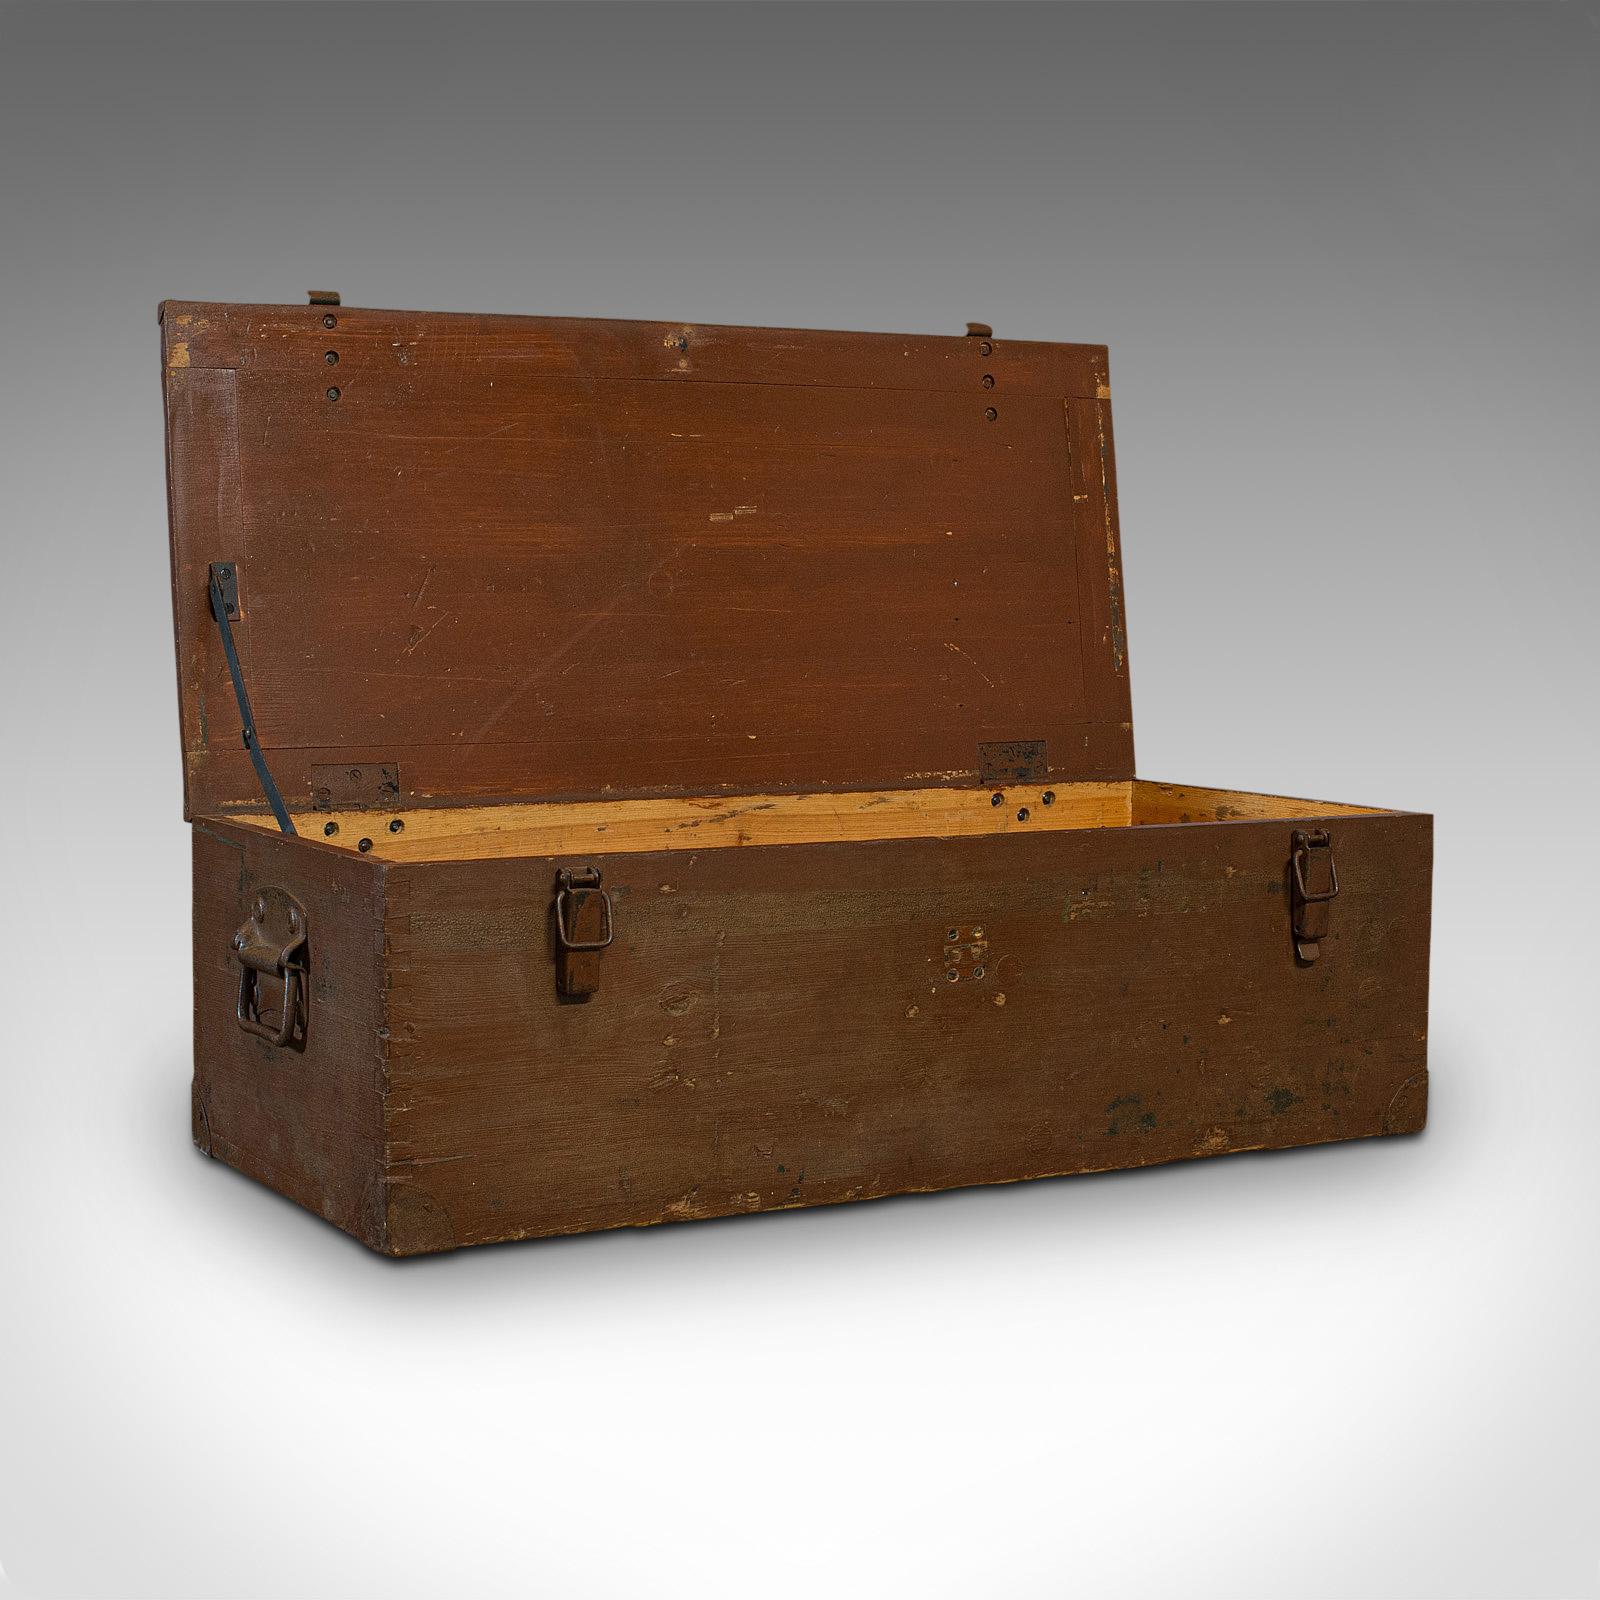 This is a large vintage carriage chest. A Welsh, stained pine linen trunk, dating to the mid-20th century, circa 1950.

Generously sized - ideal for coffee table use
Displays a desirable aged patina
Stained pine in good order with dark caramel